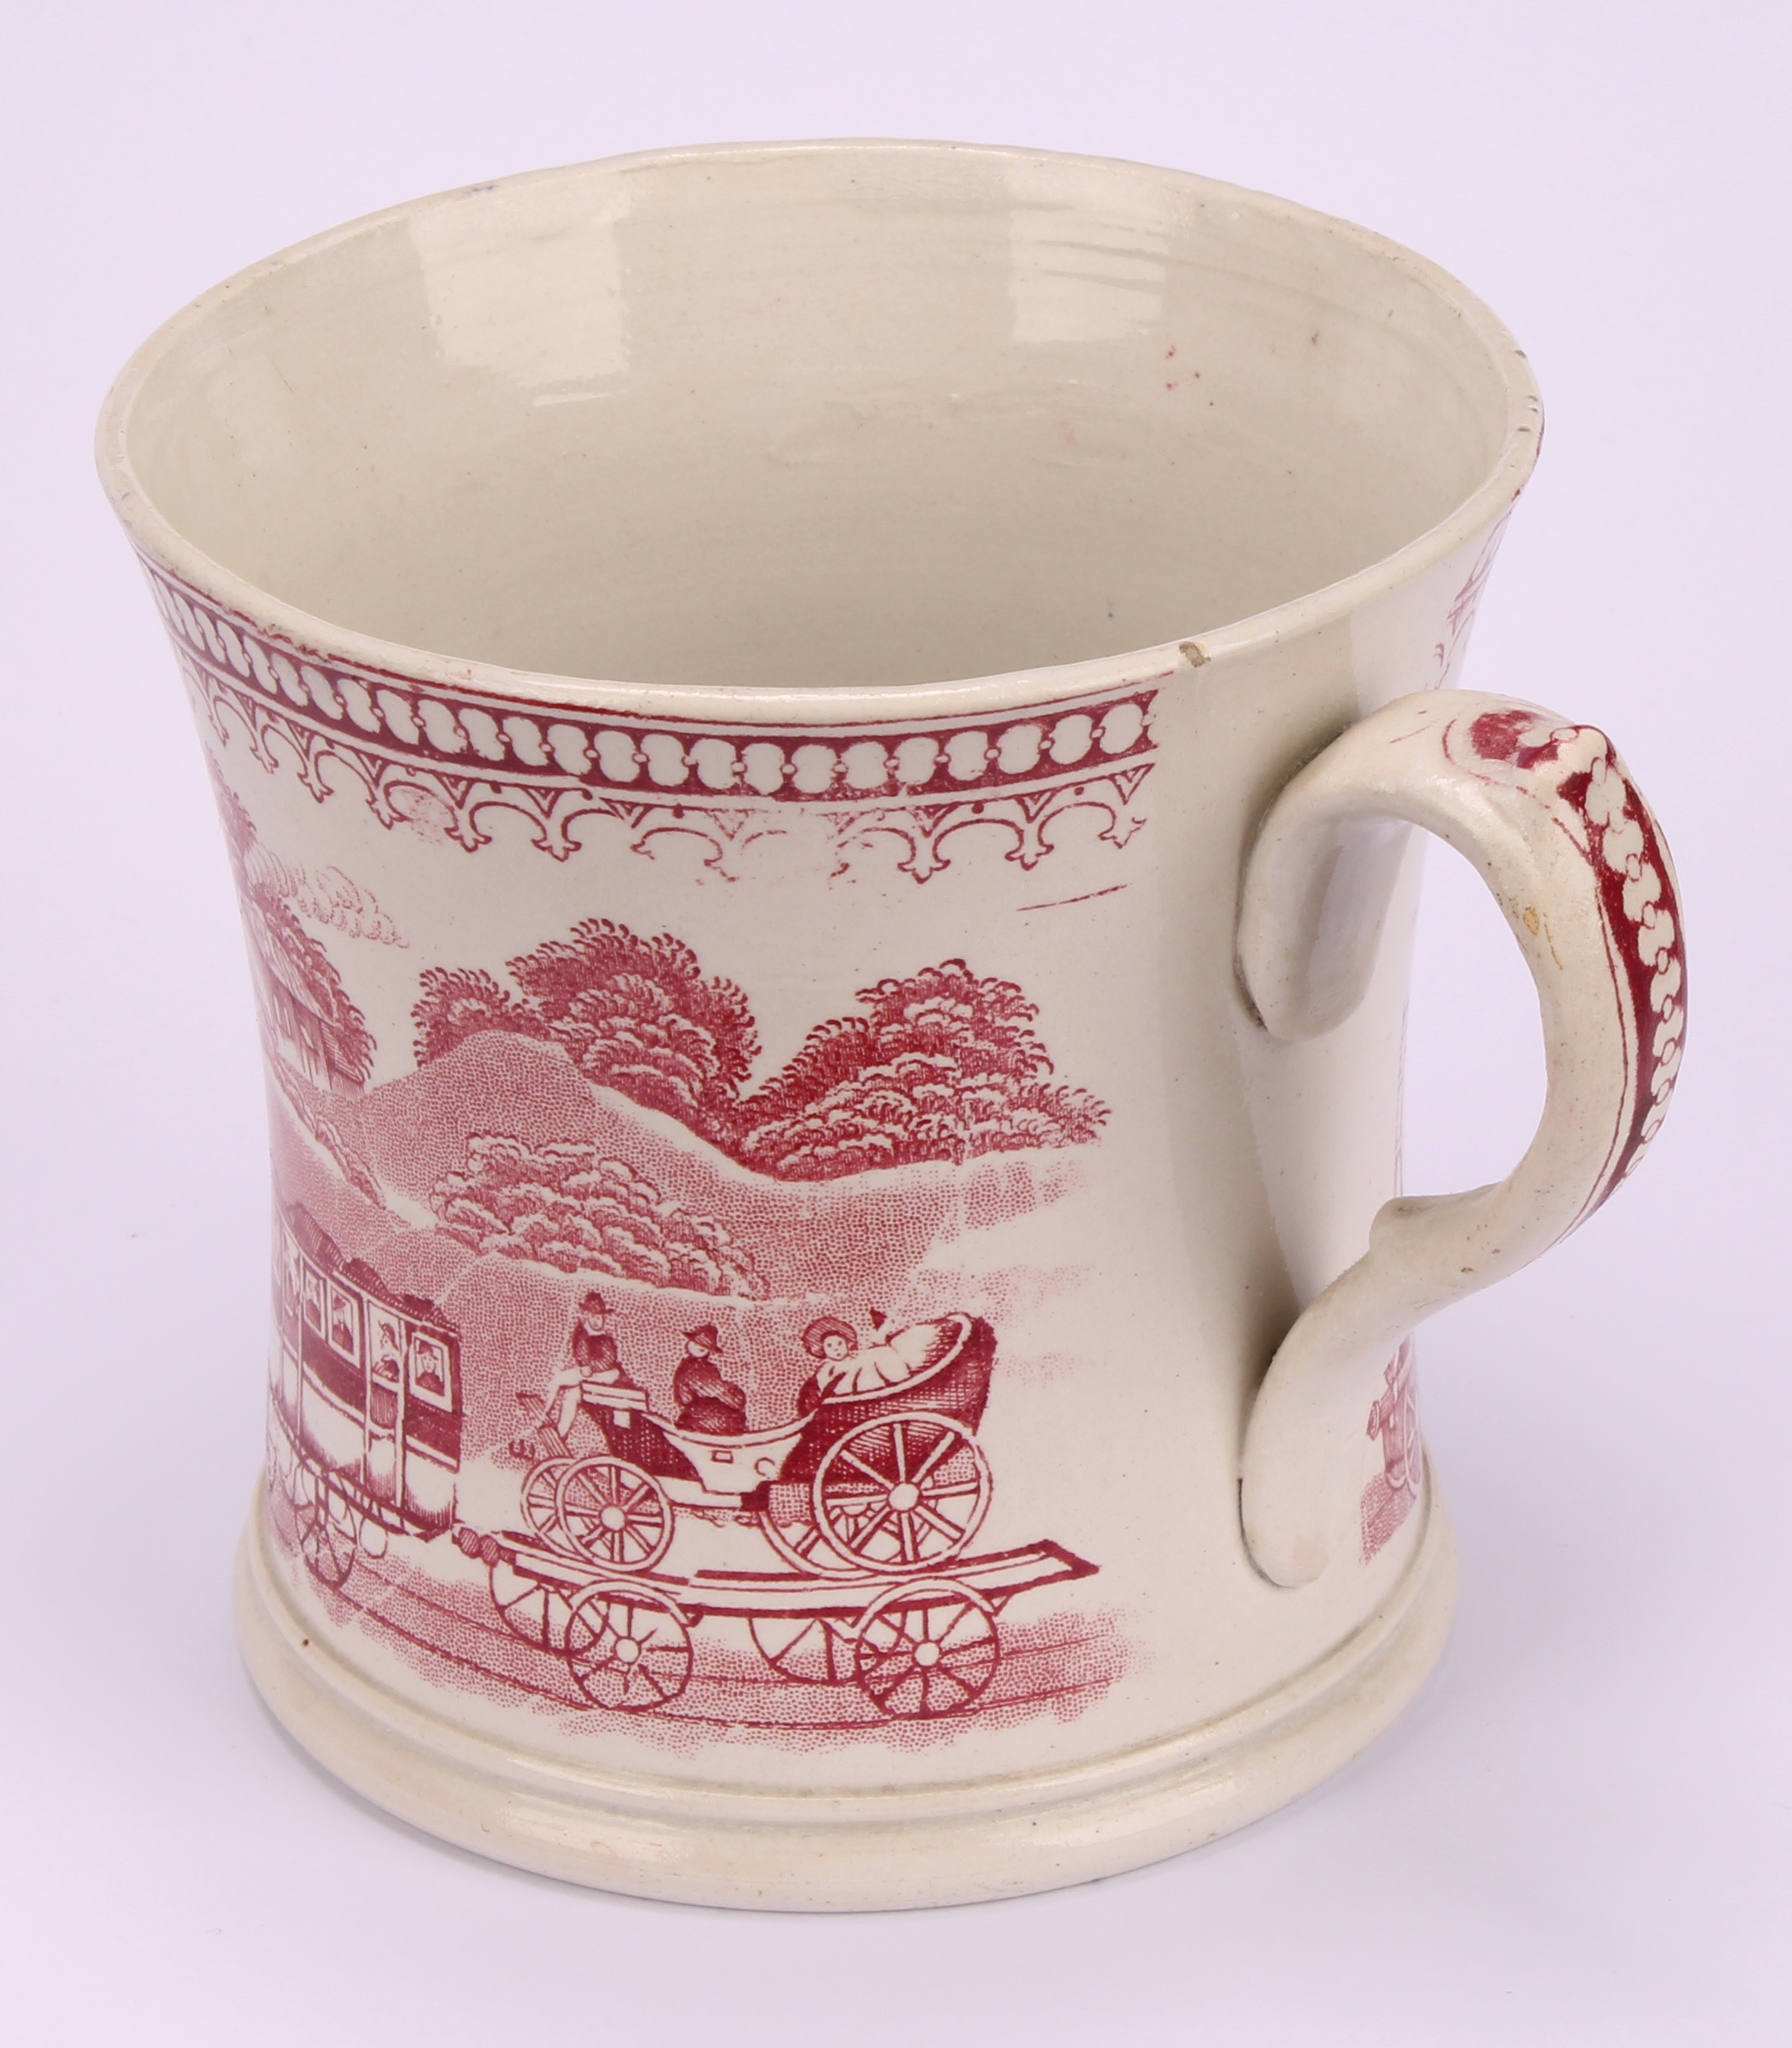 Railway Interest - steam locomotives, a 19th century Staffordshire pearlware mug, printed in sepia - Image 6 of 8